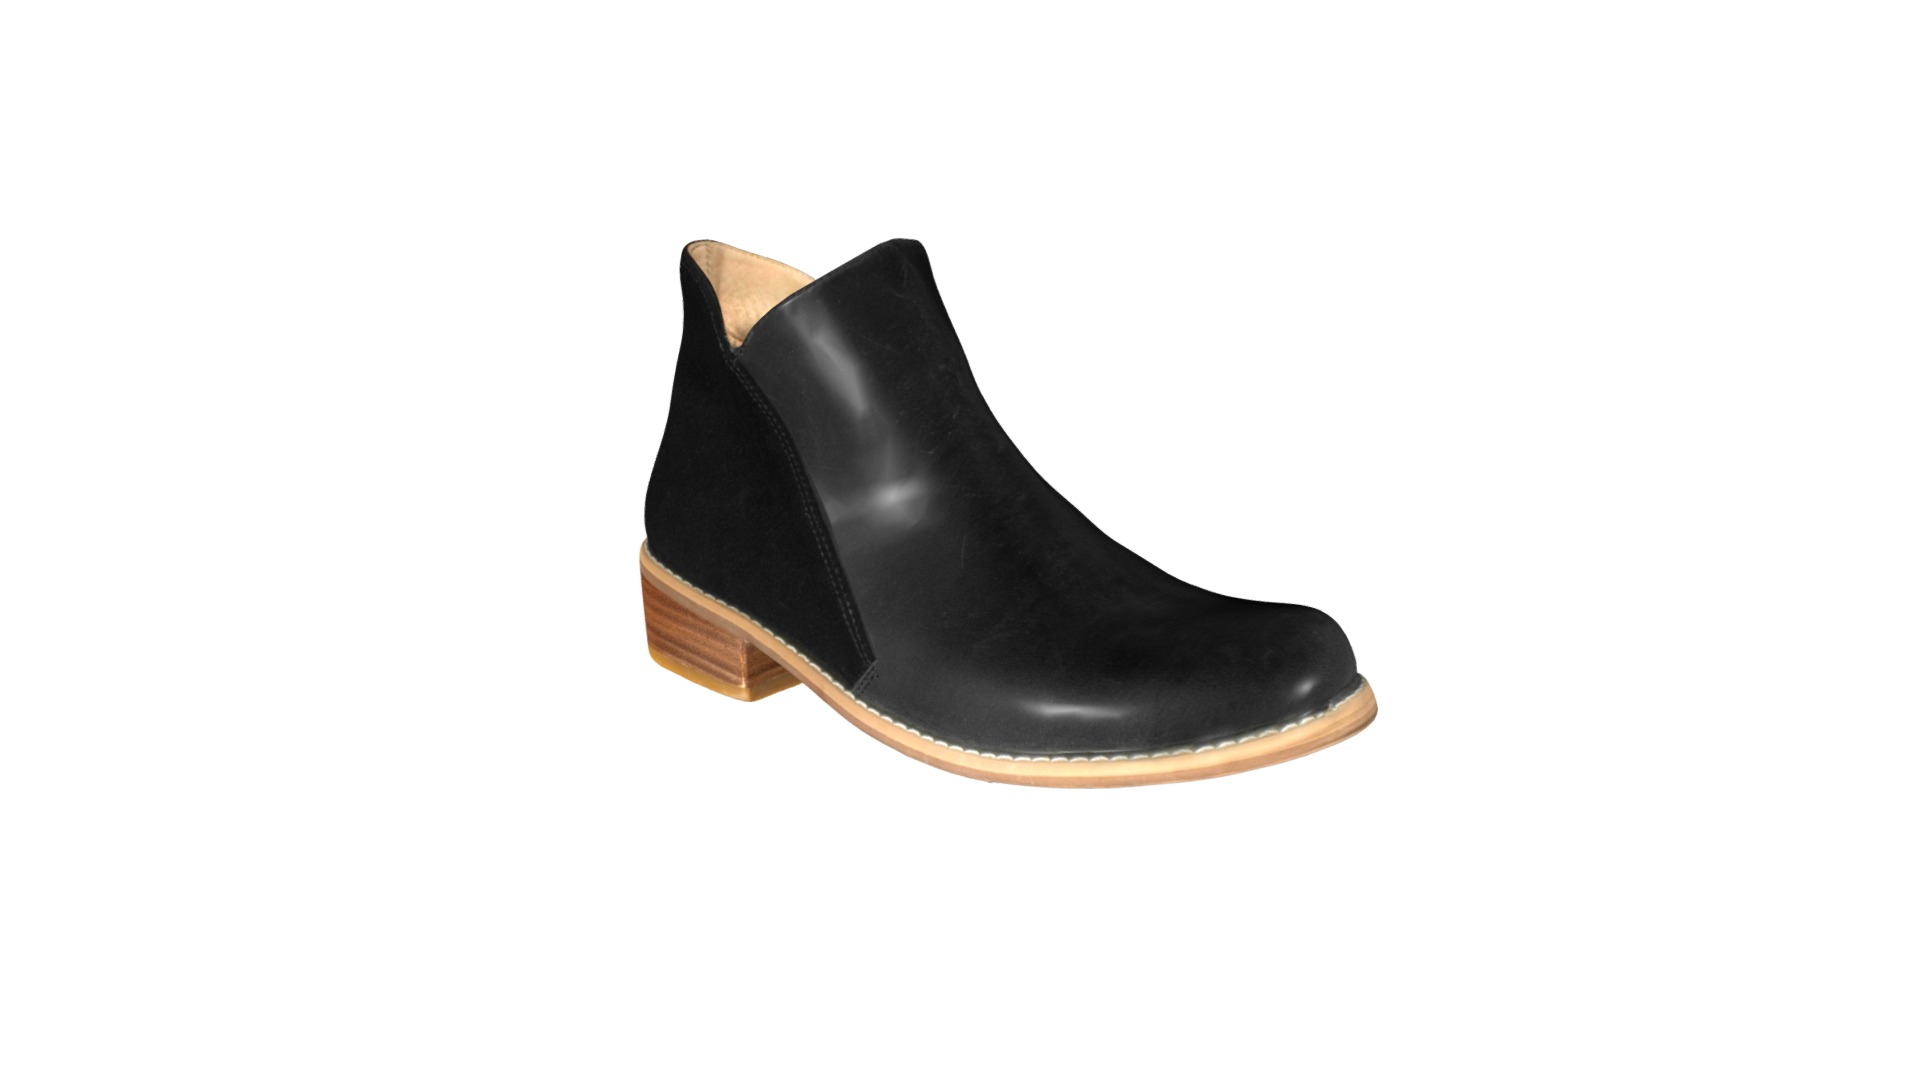 3D model Modelo - This is a 3D model of the Modelo. The 3D model is about a black high heeled shoe.